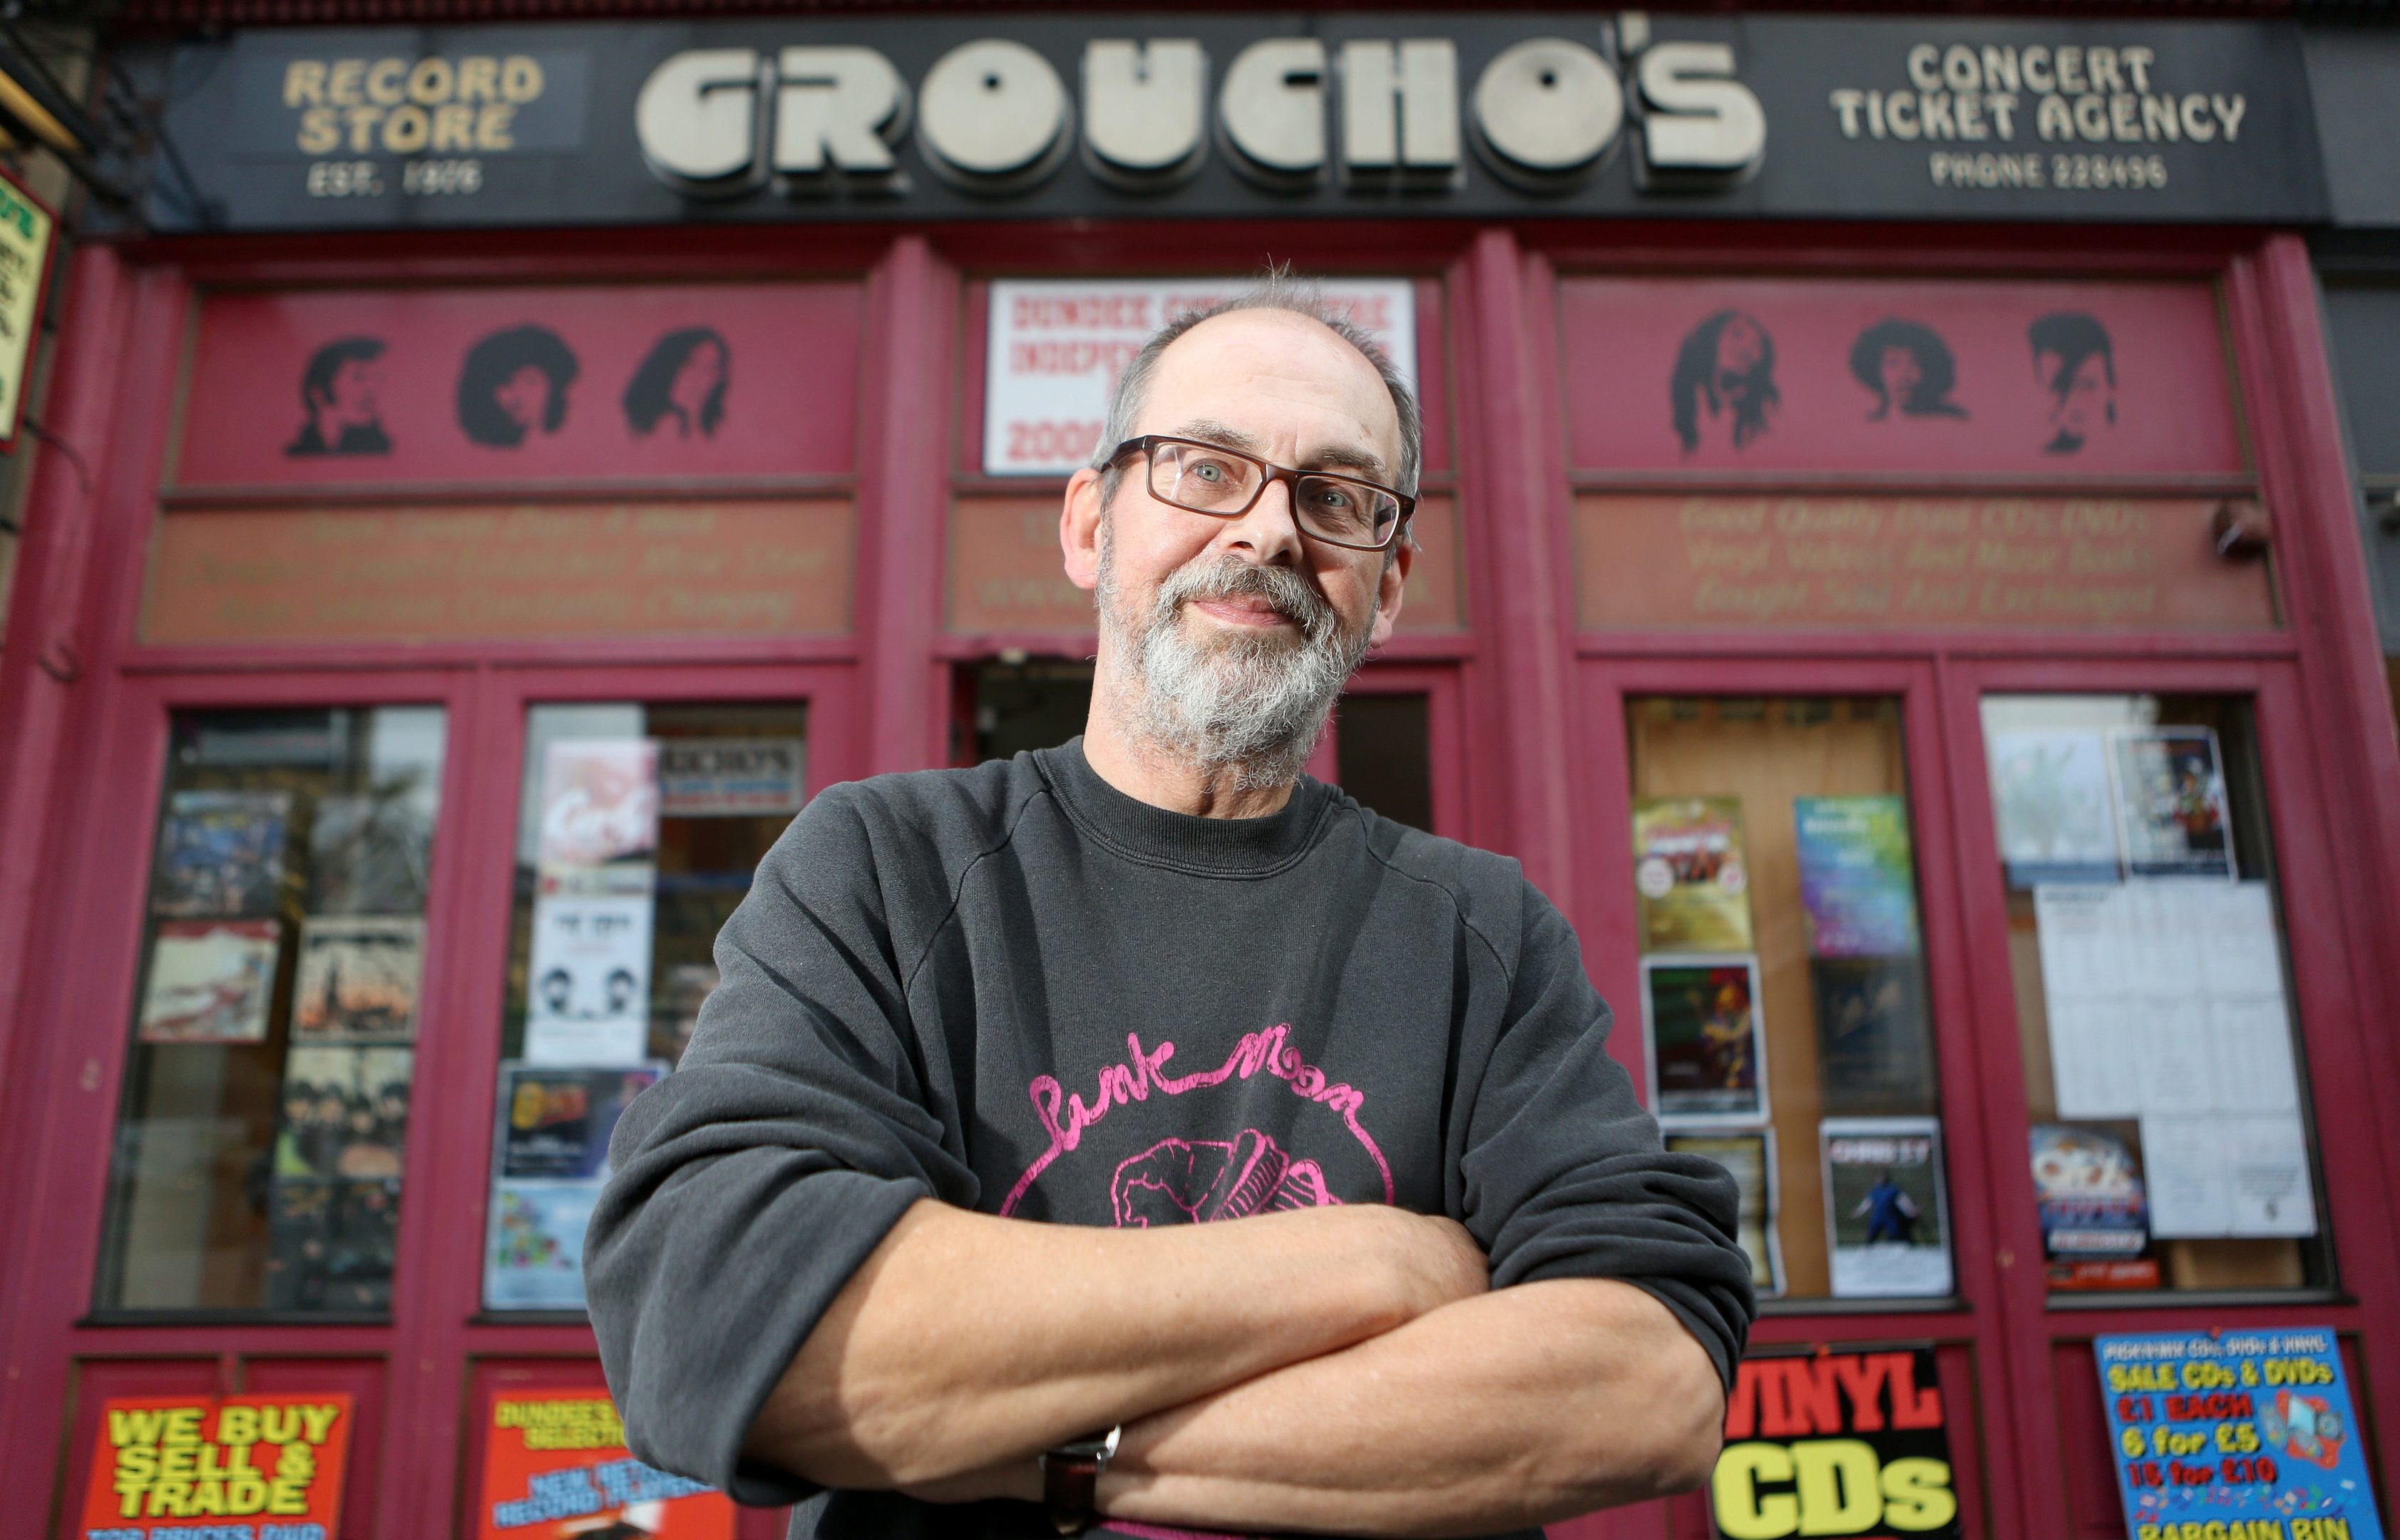 Alastair ‘Breeks’ Brodie owned Groucho's for 40 years before his death in 2019. Image: DC Thomson